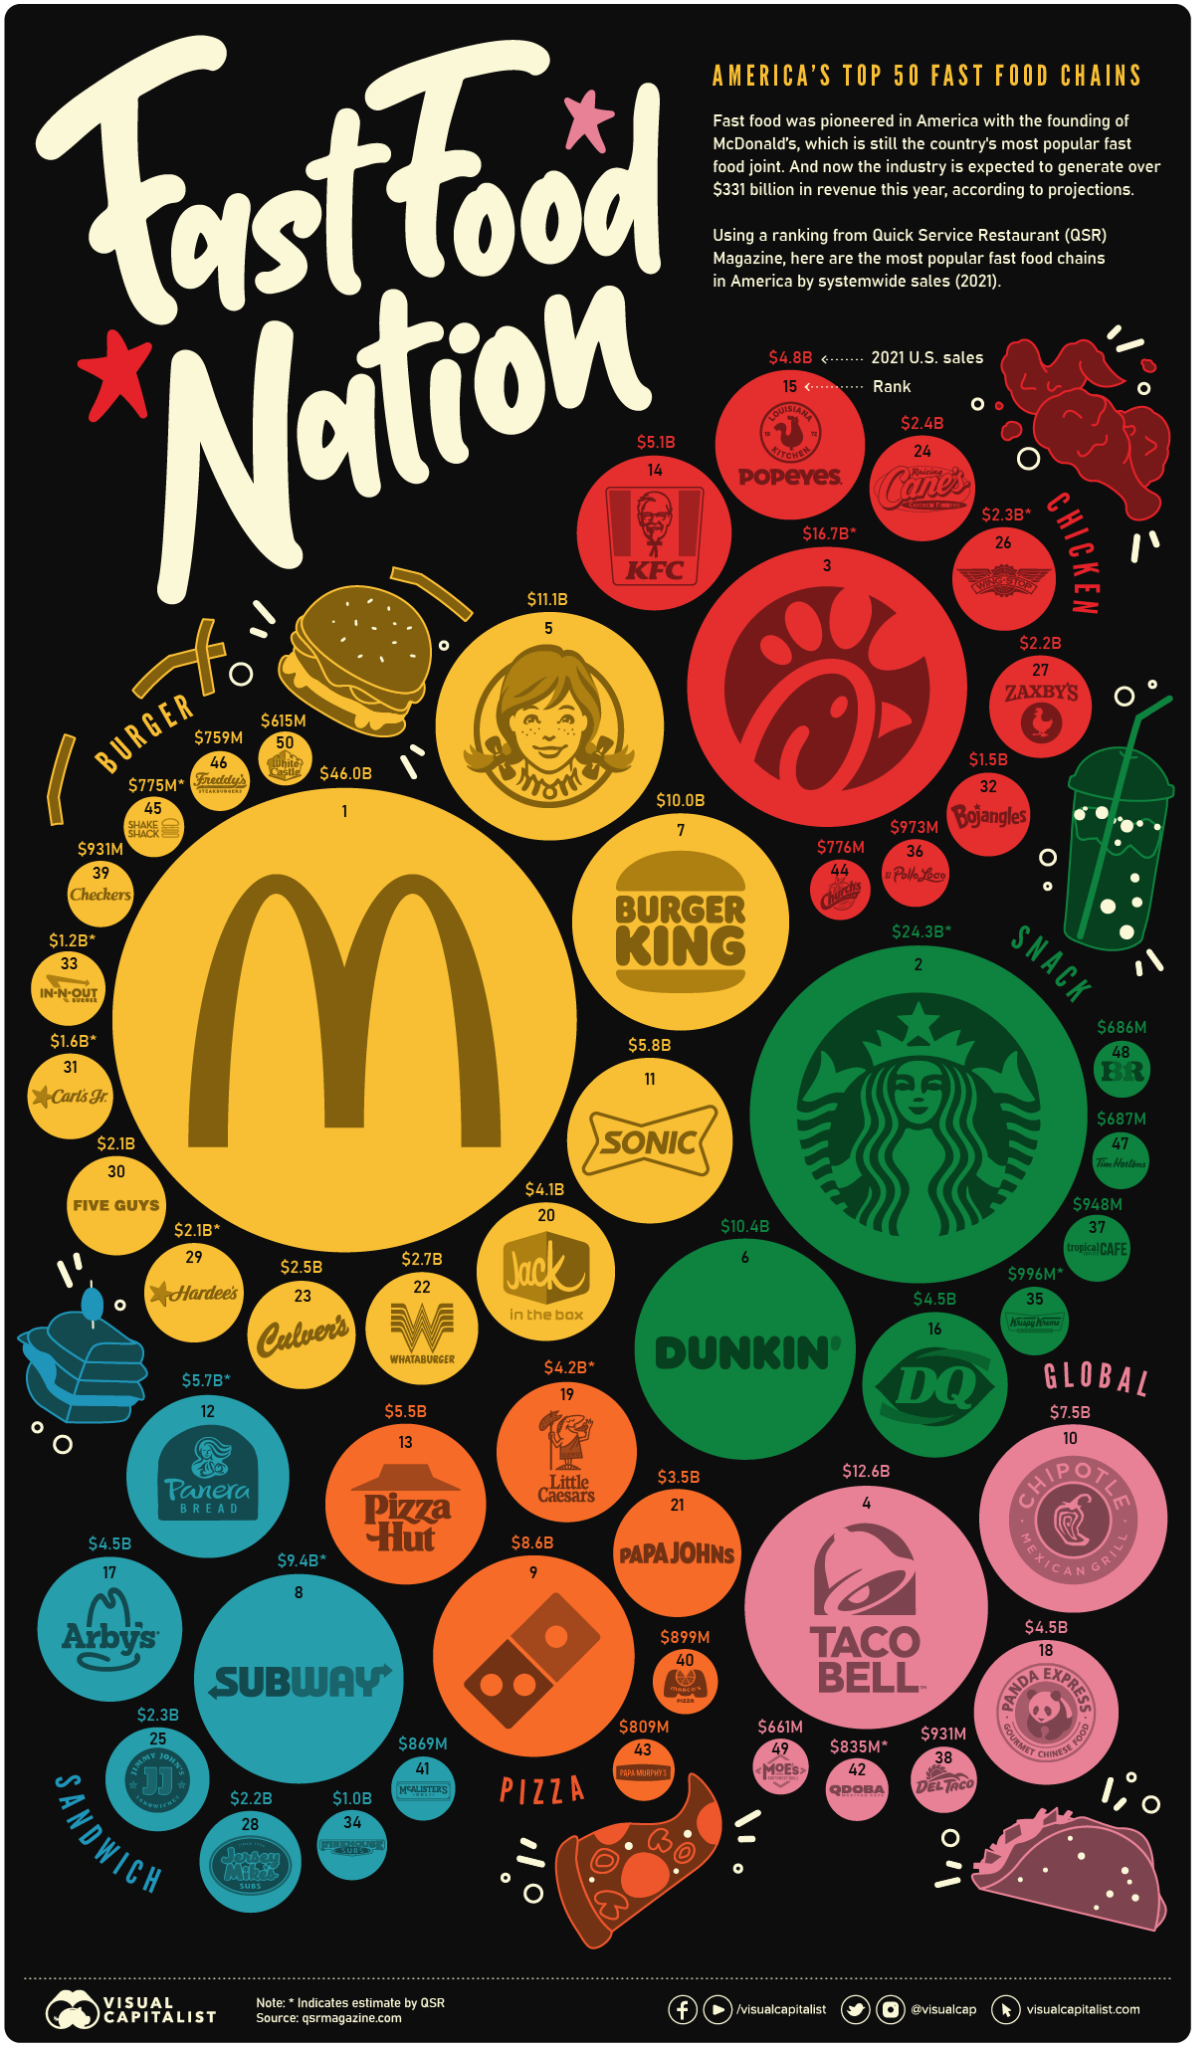 An example of data storytelling of America's top 50 fast food chains